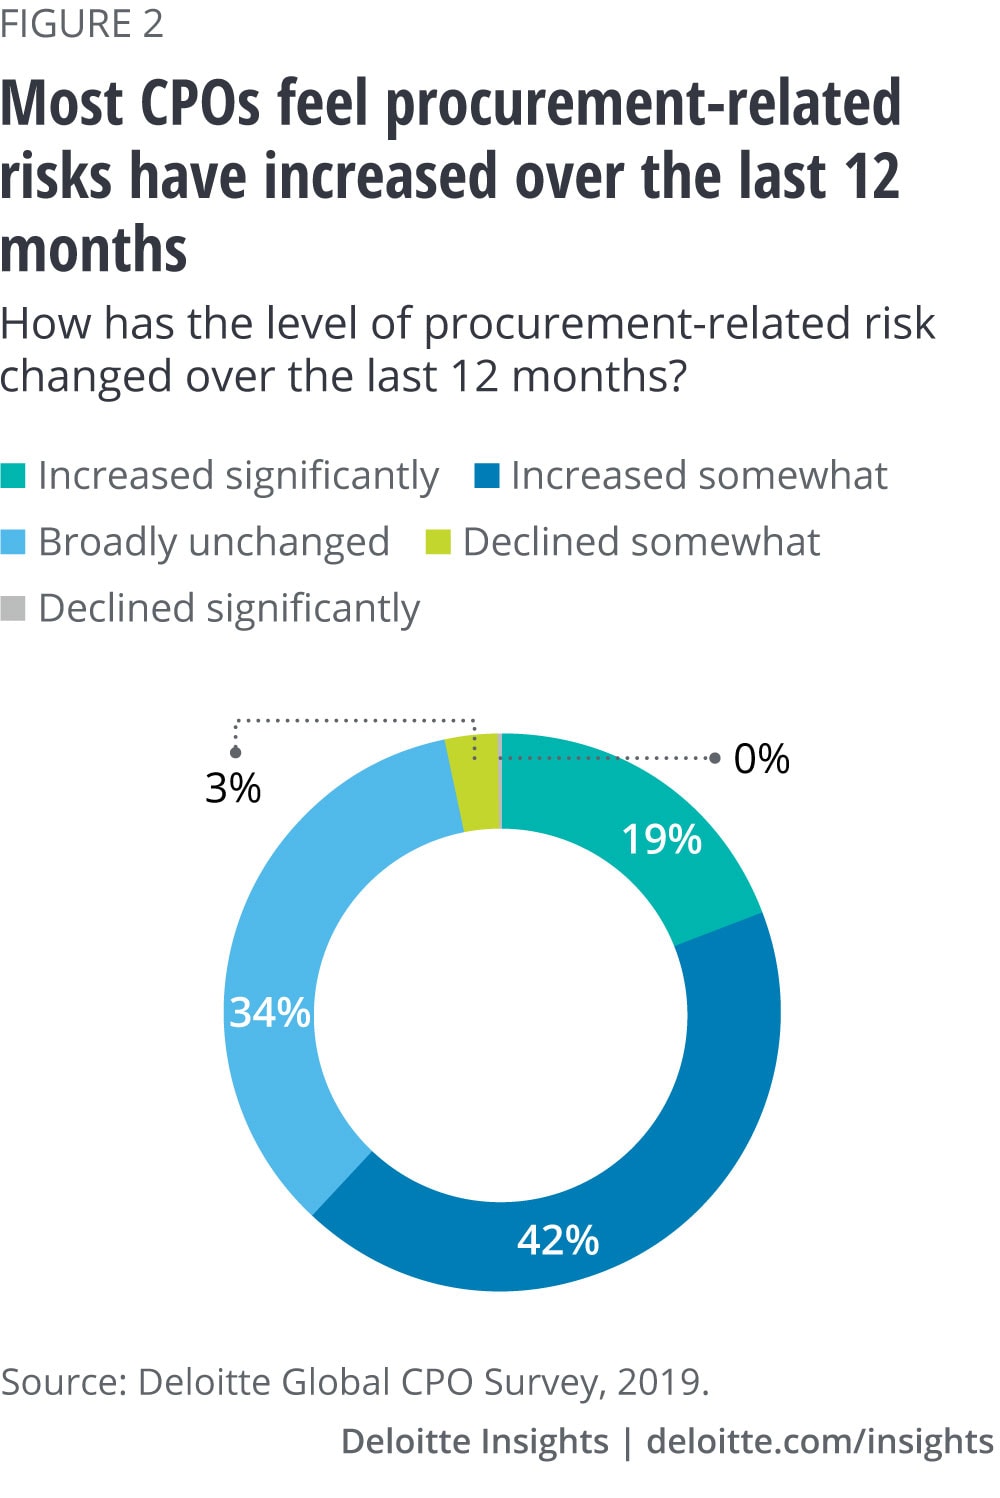 most CPOs feel procurement-related risks have increased over the last 12 months